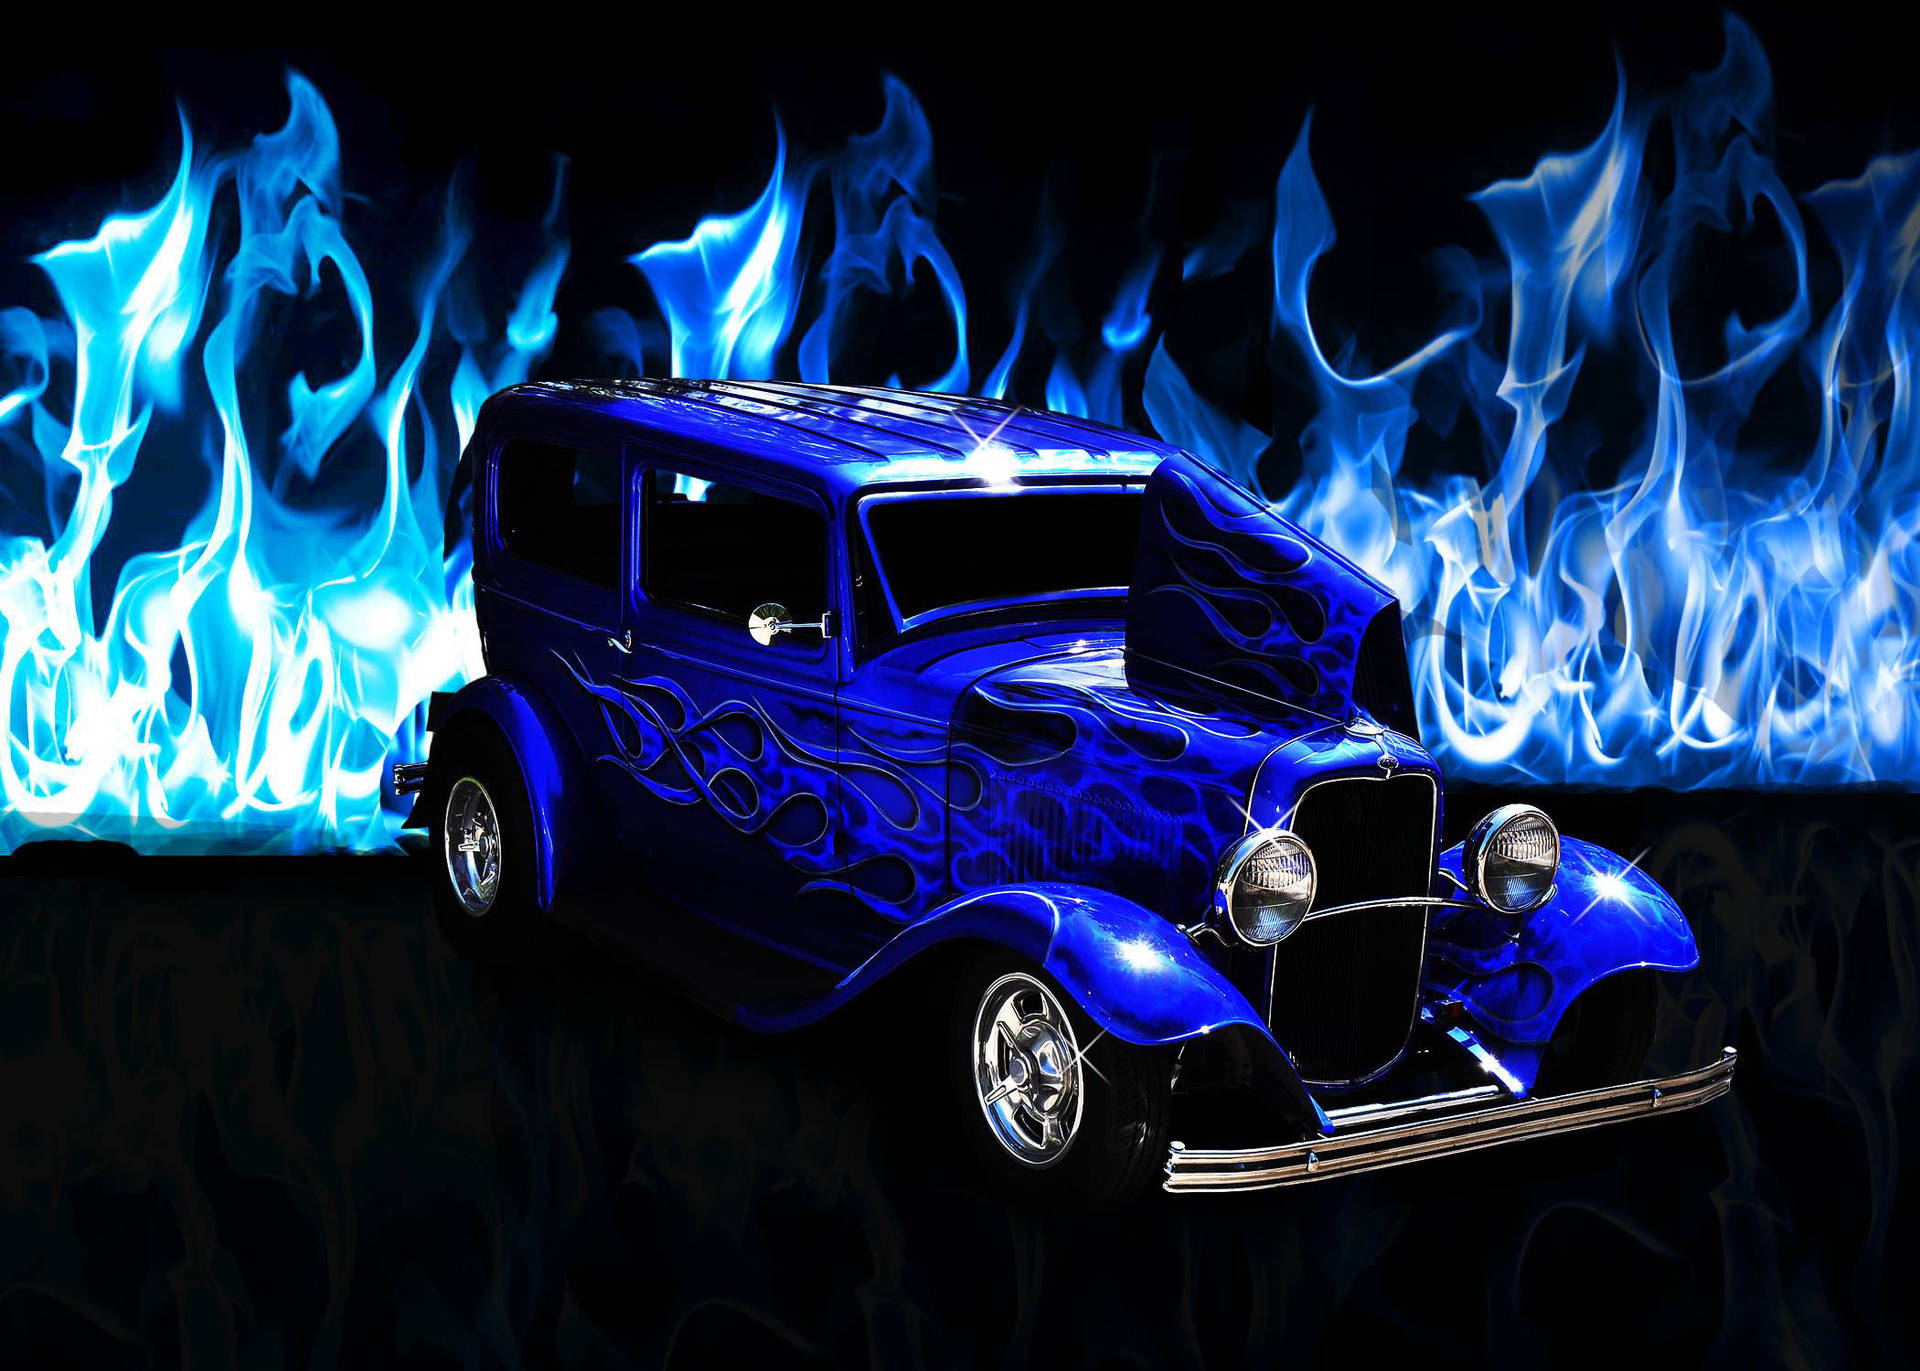 Vibrant Blue Flames Engulfing A Vintage Ford Background